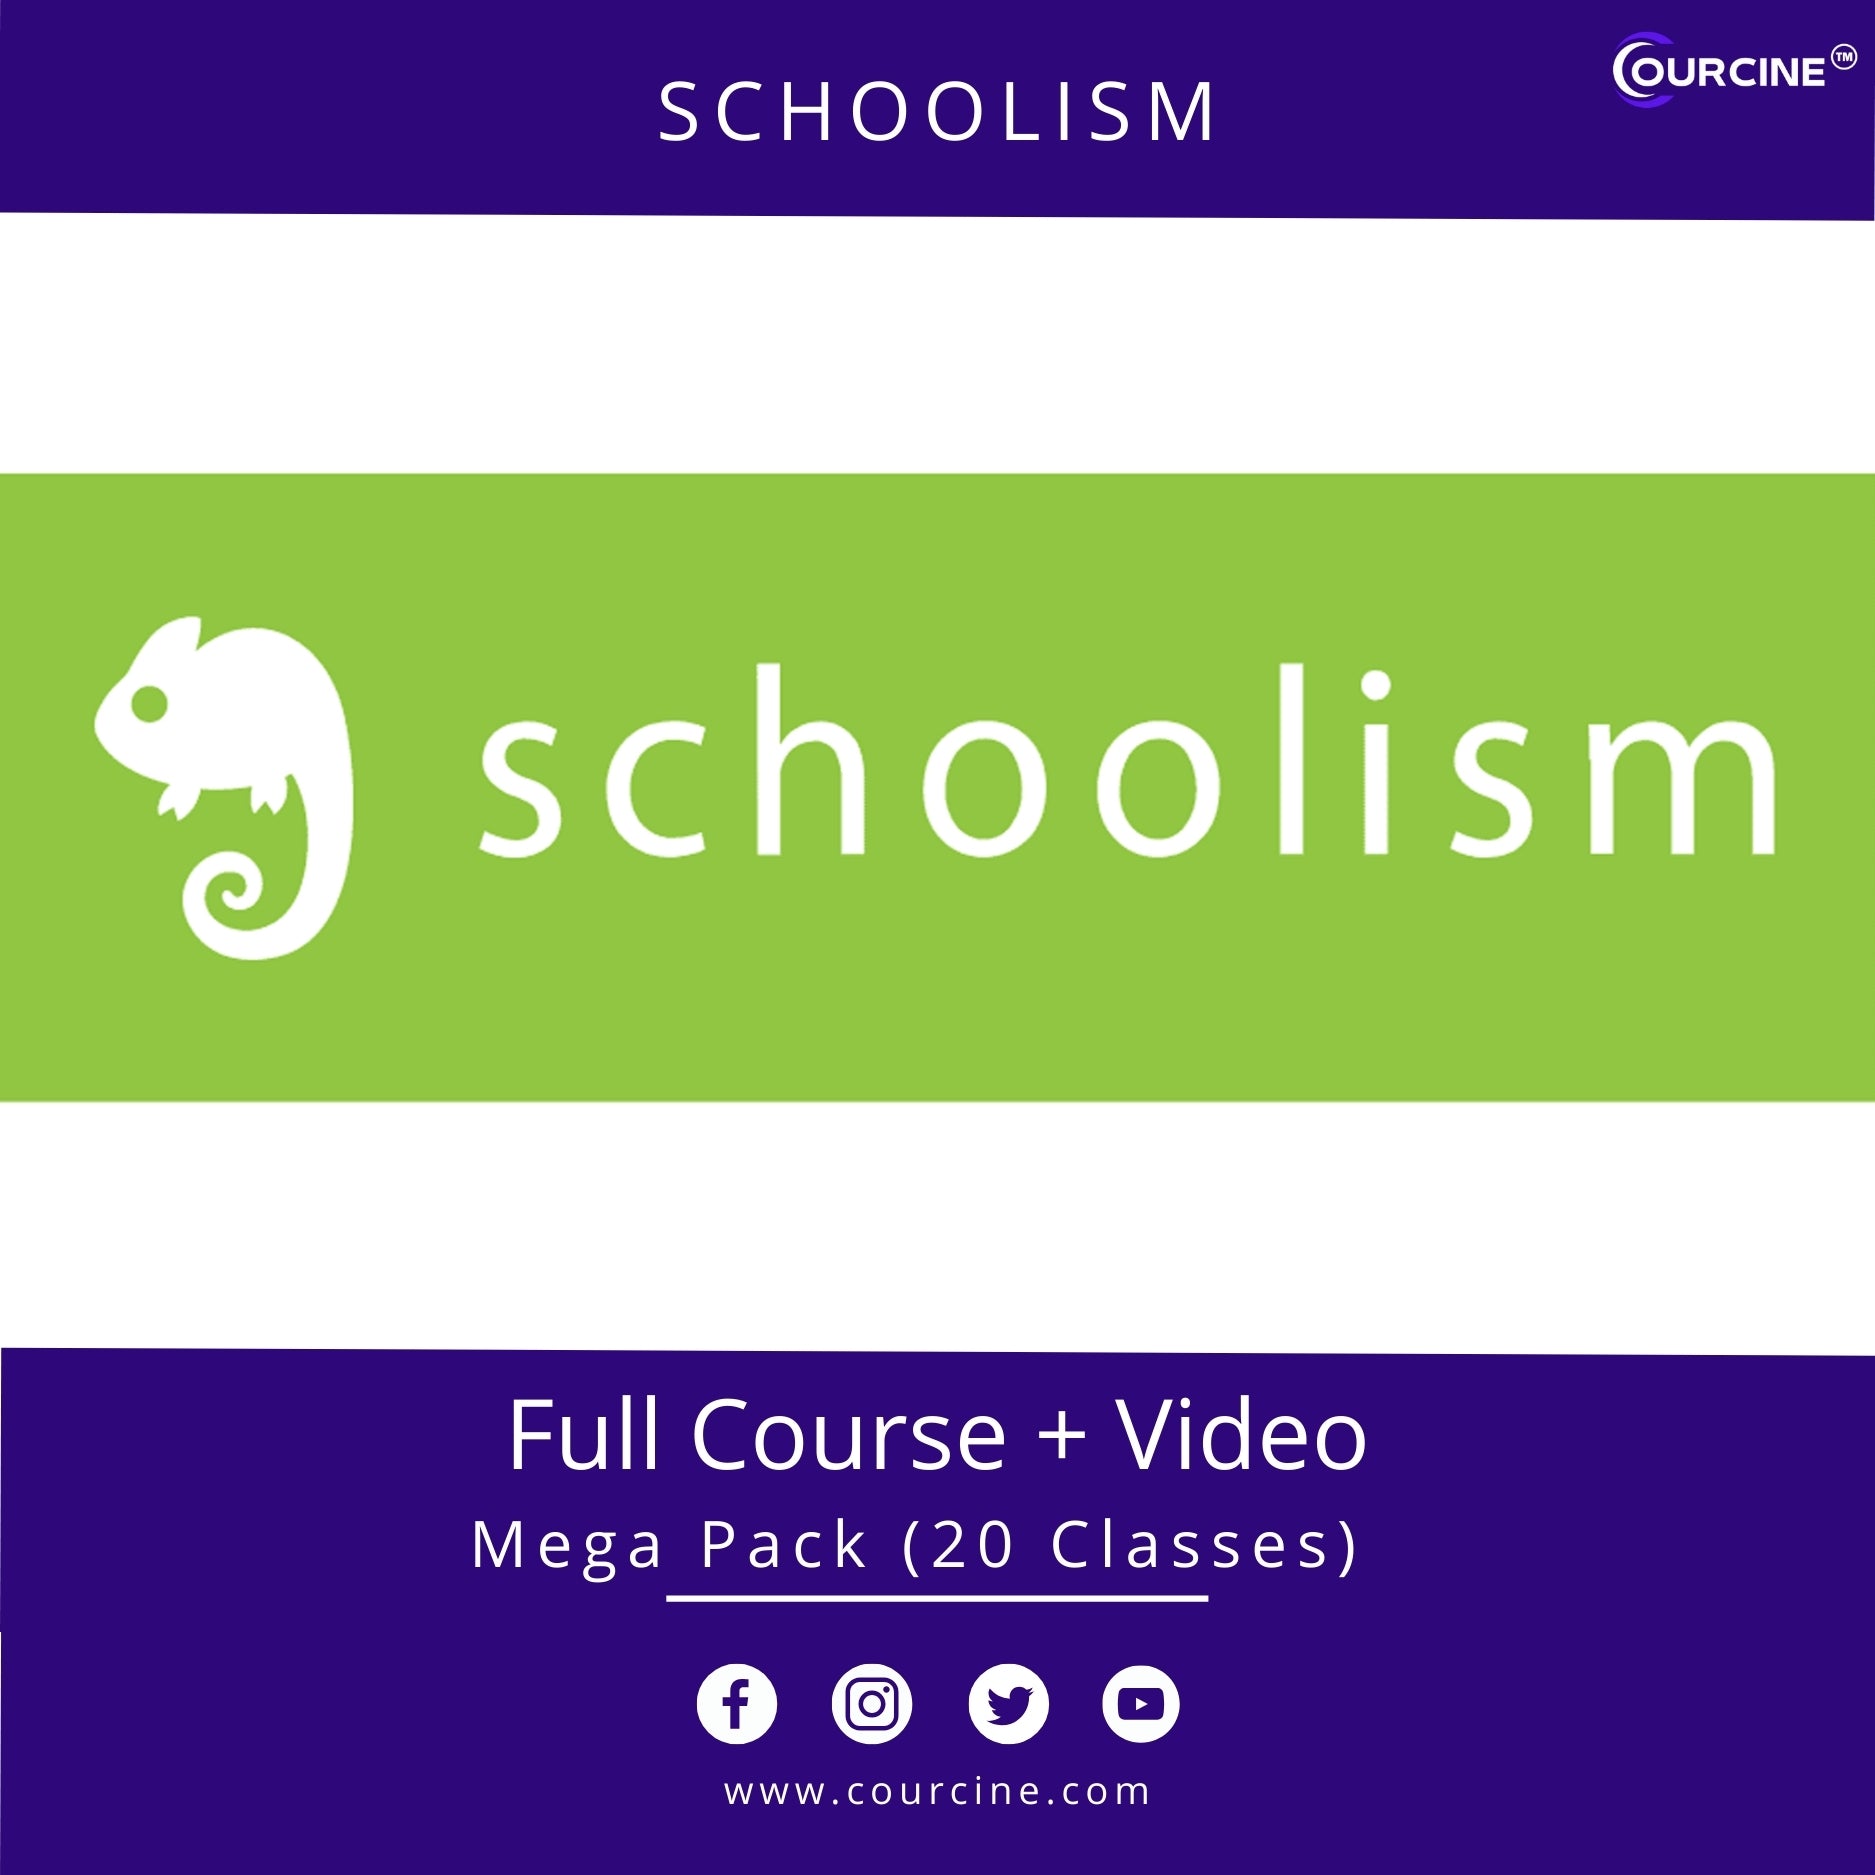 Schoolism – Mega Pack (20 Classes) with Jason Seiler, Nathan Fowkes, Stephen Silver, Thomas Fluharty and others Online Course